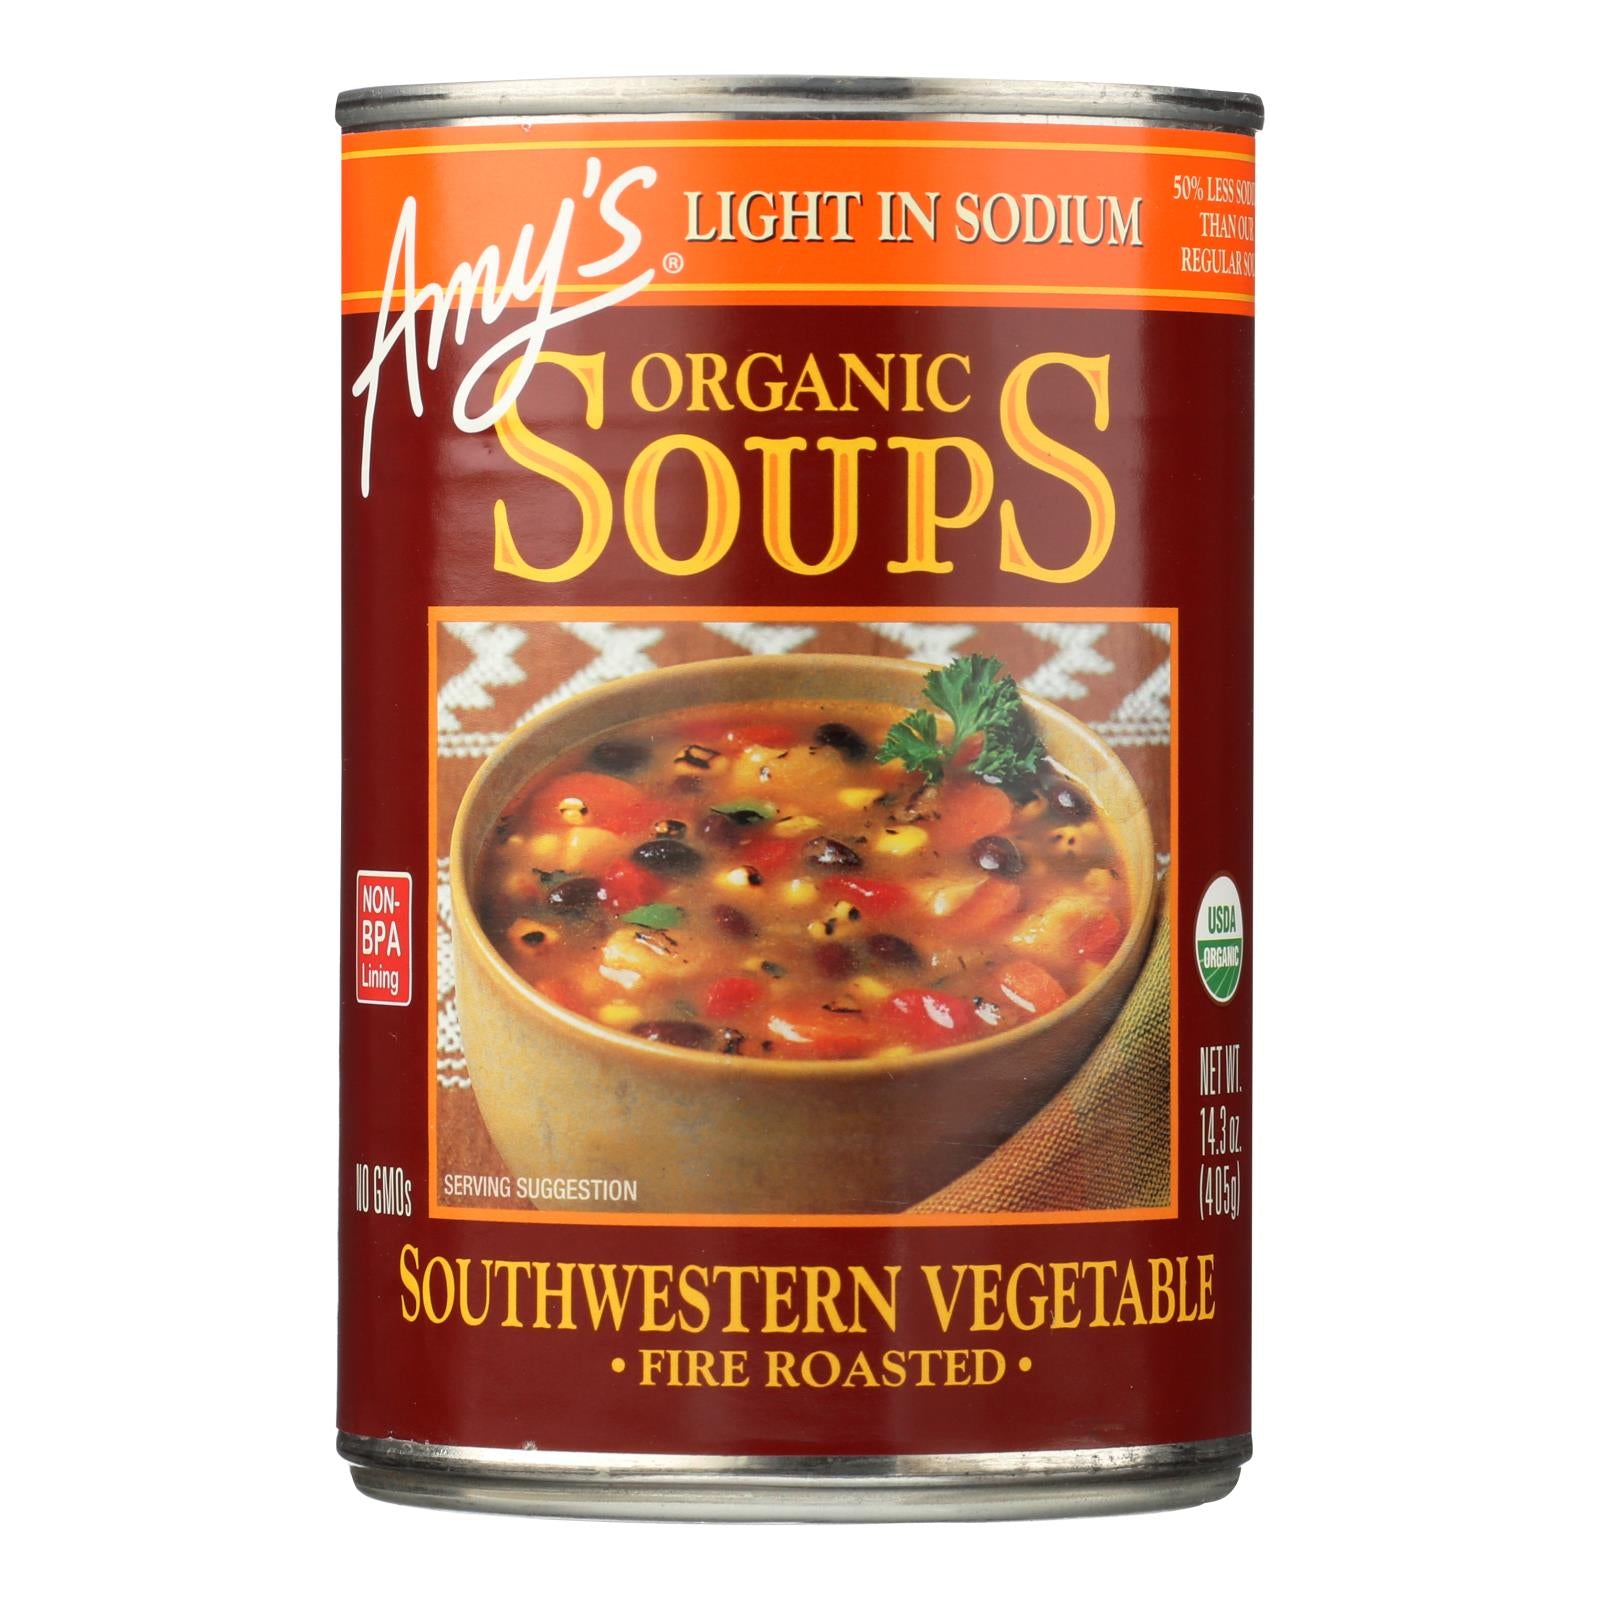 Amy's - Soup Organic Fire Roasted Southwestern Vegetable - Case Of 12 - 14.3 Oz